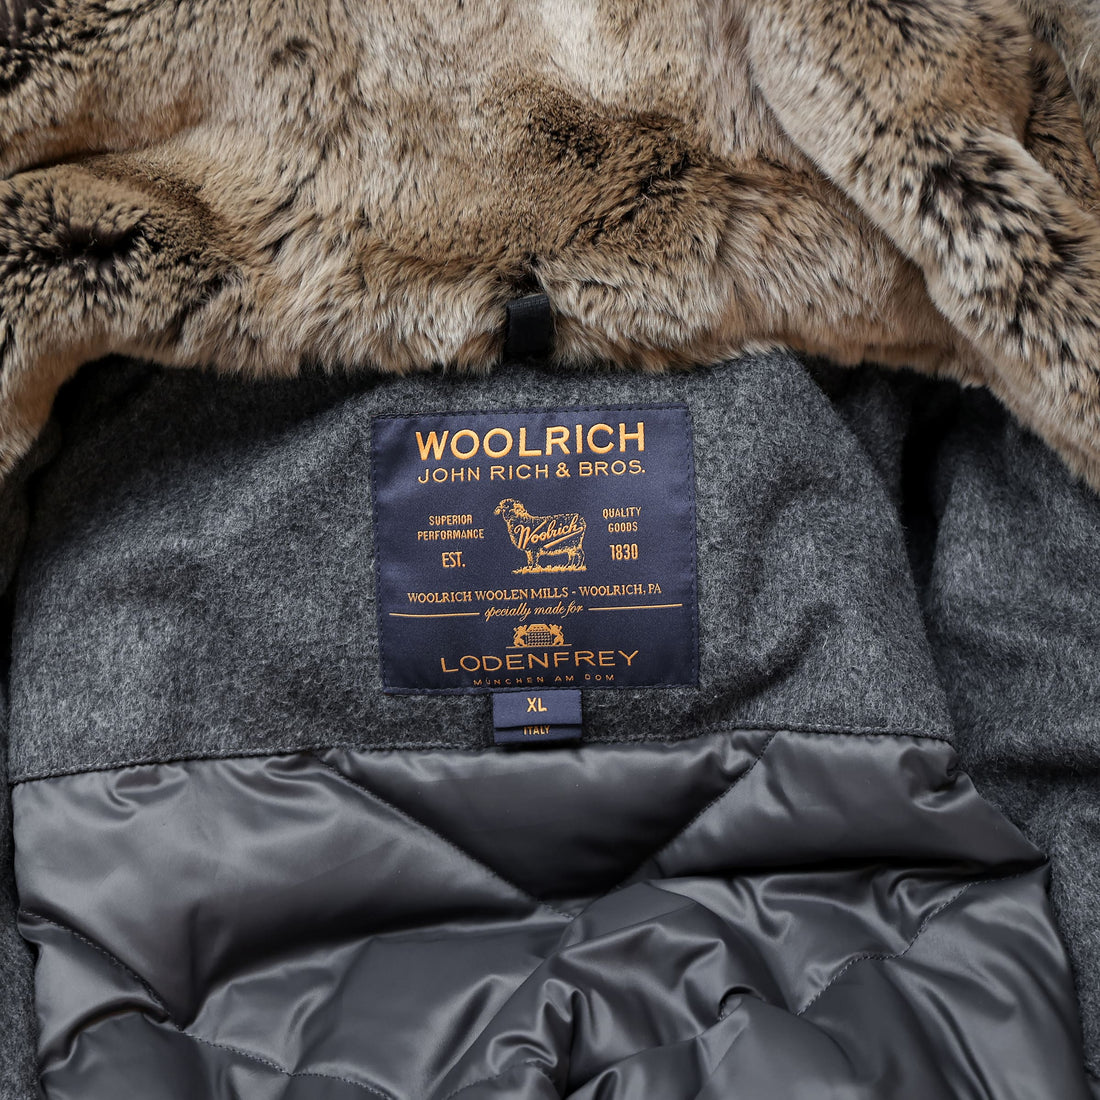 Woolrich down parka "Special Lodenfrey Edition" made of loden